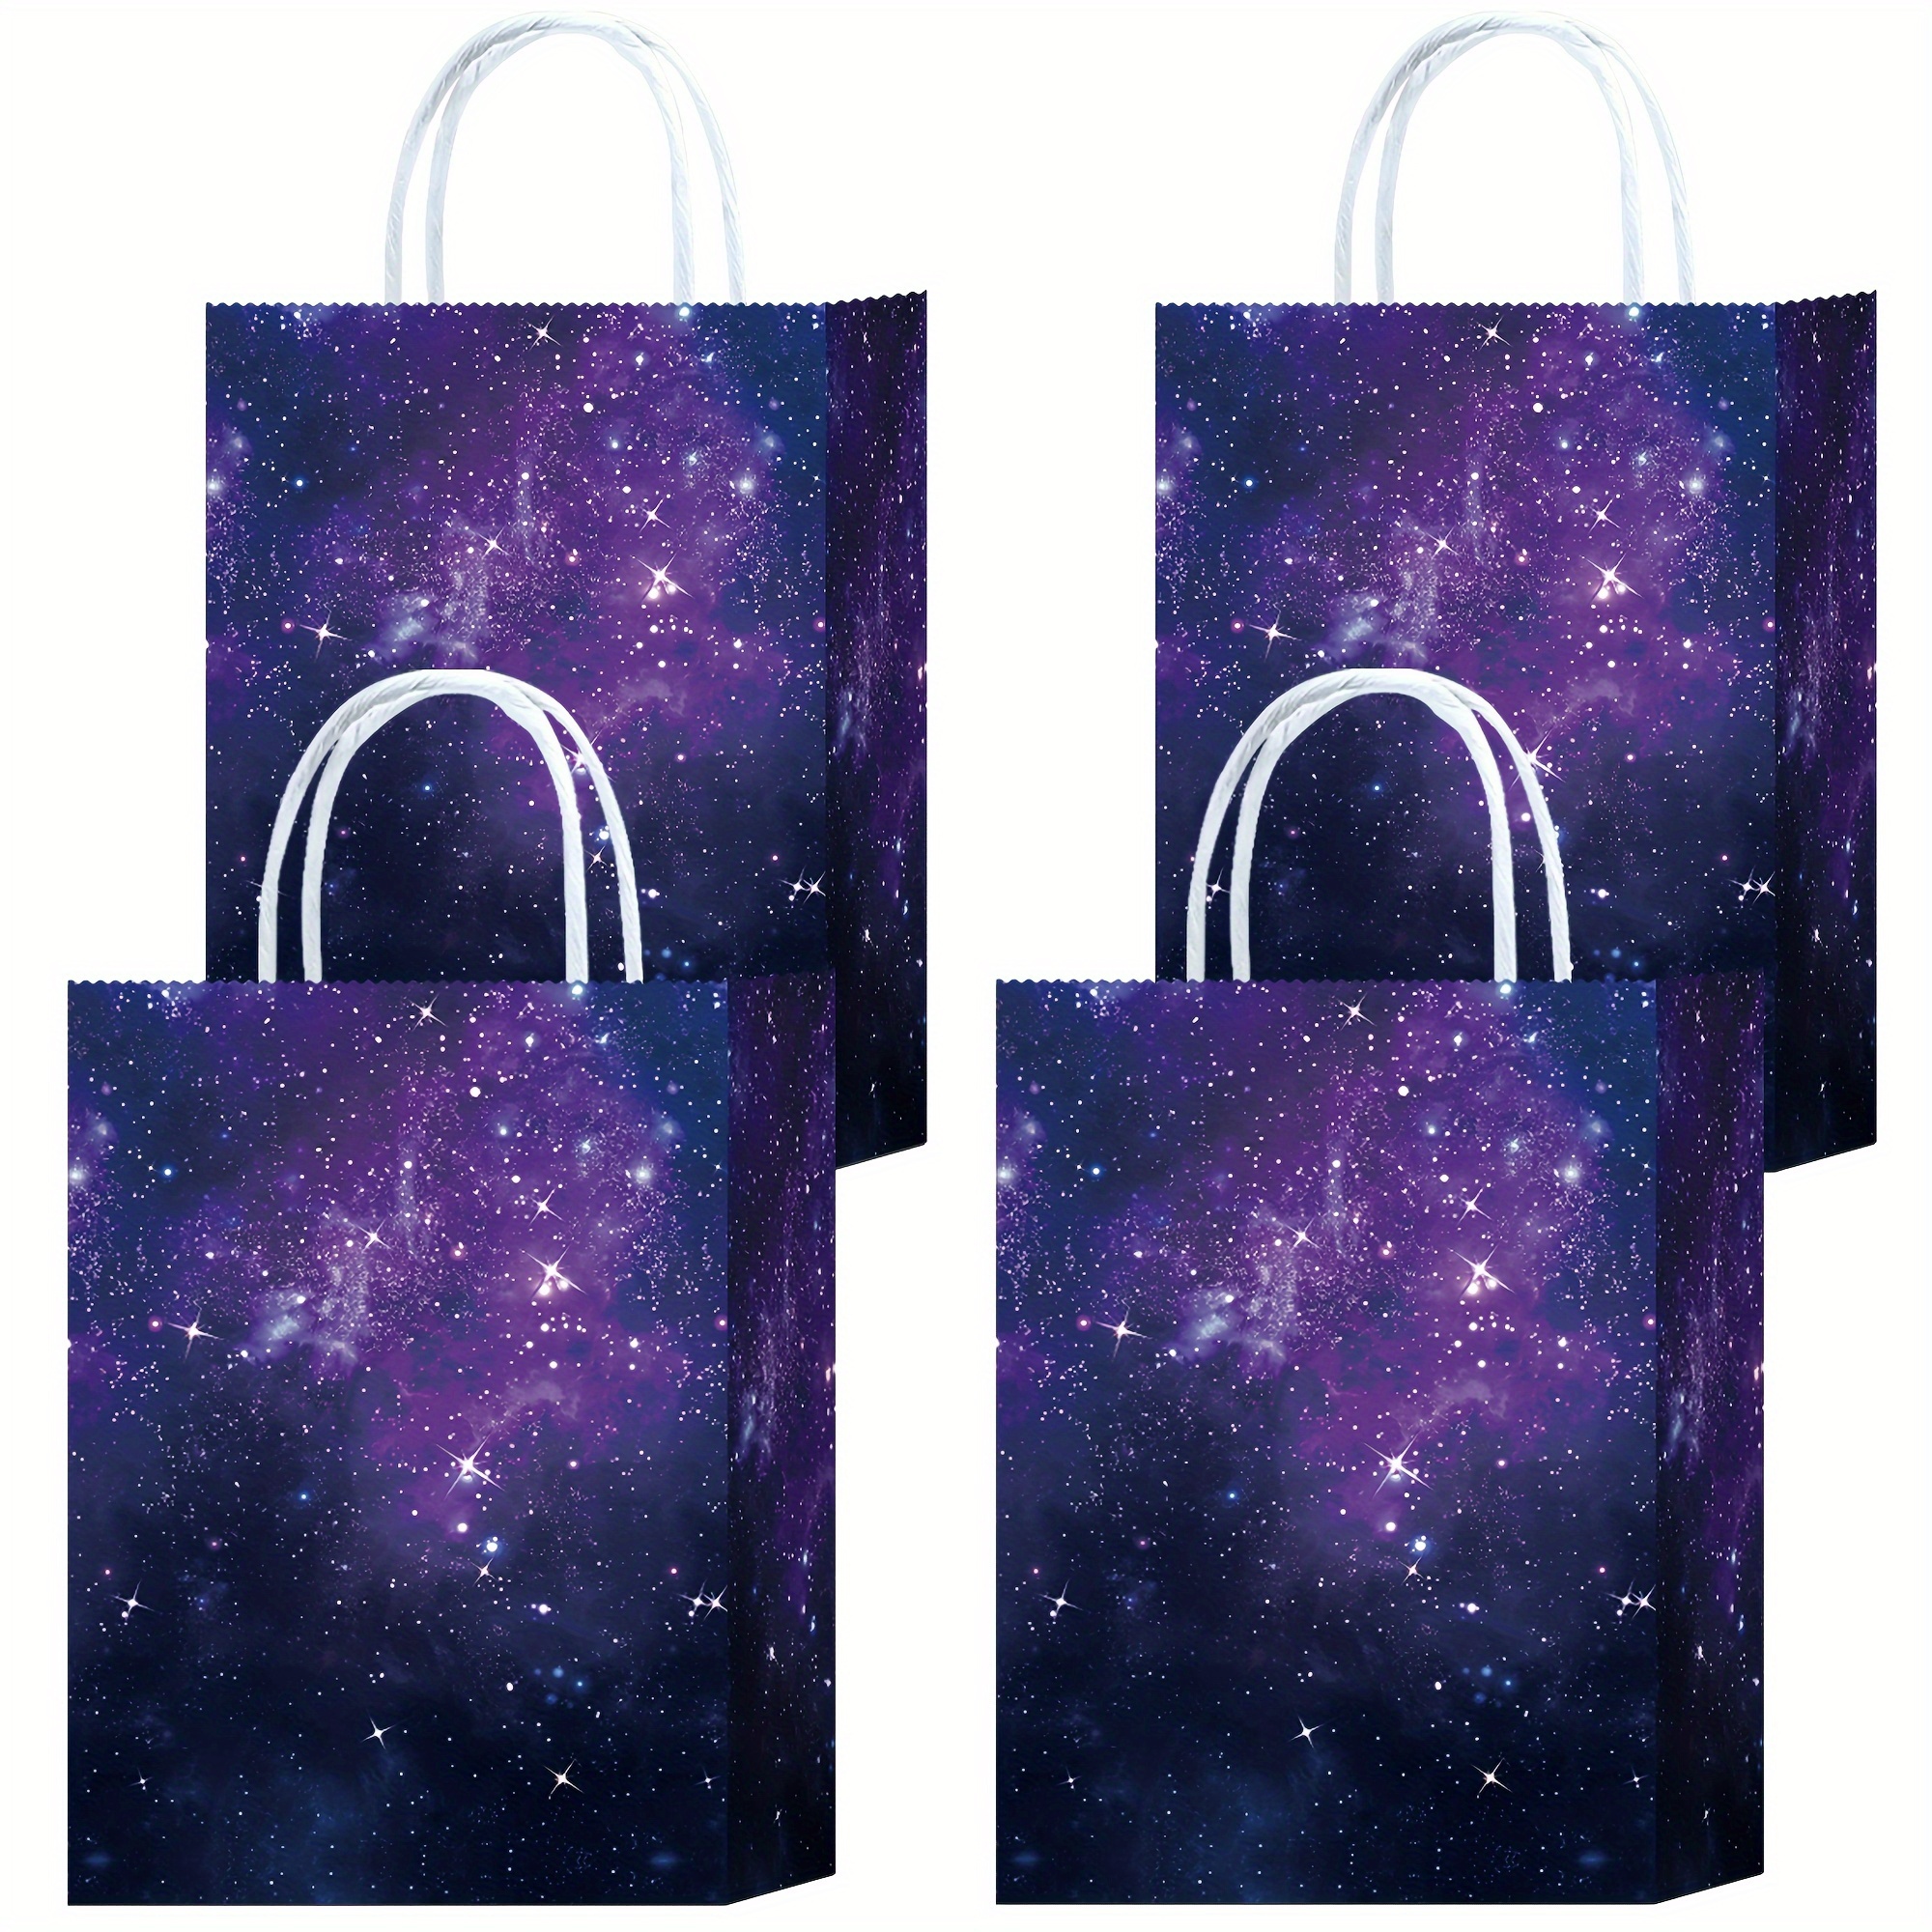 

12-piece Large Galaxy Birthday Gift Bags - Purple Nebula Themed Party Favor Pieceages For All Ages, Ideal For Toys, Treats & Crafts